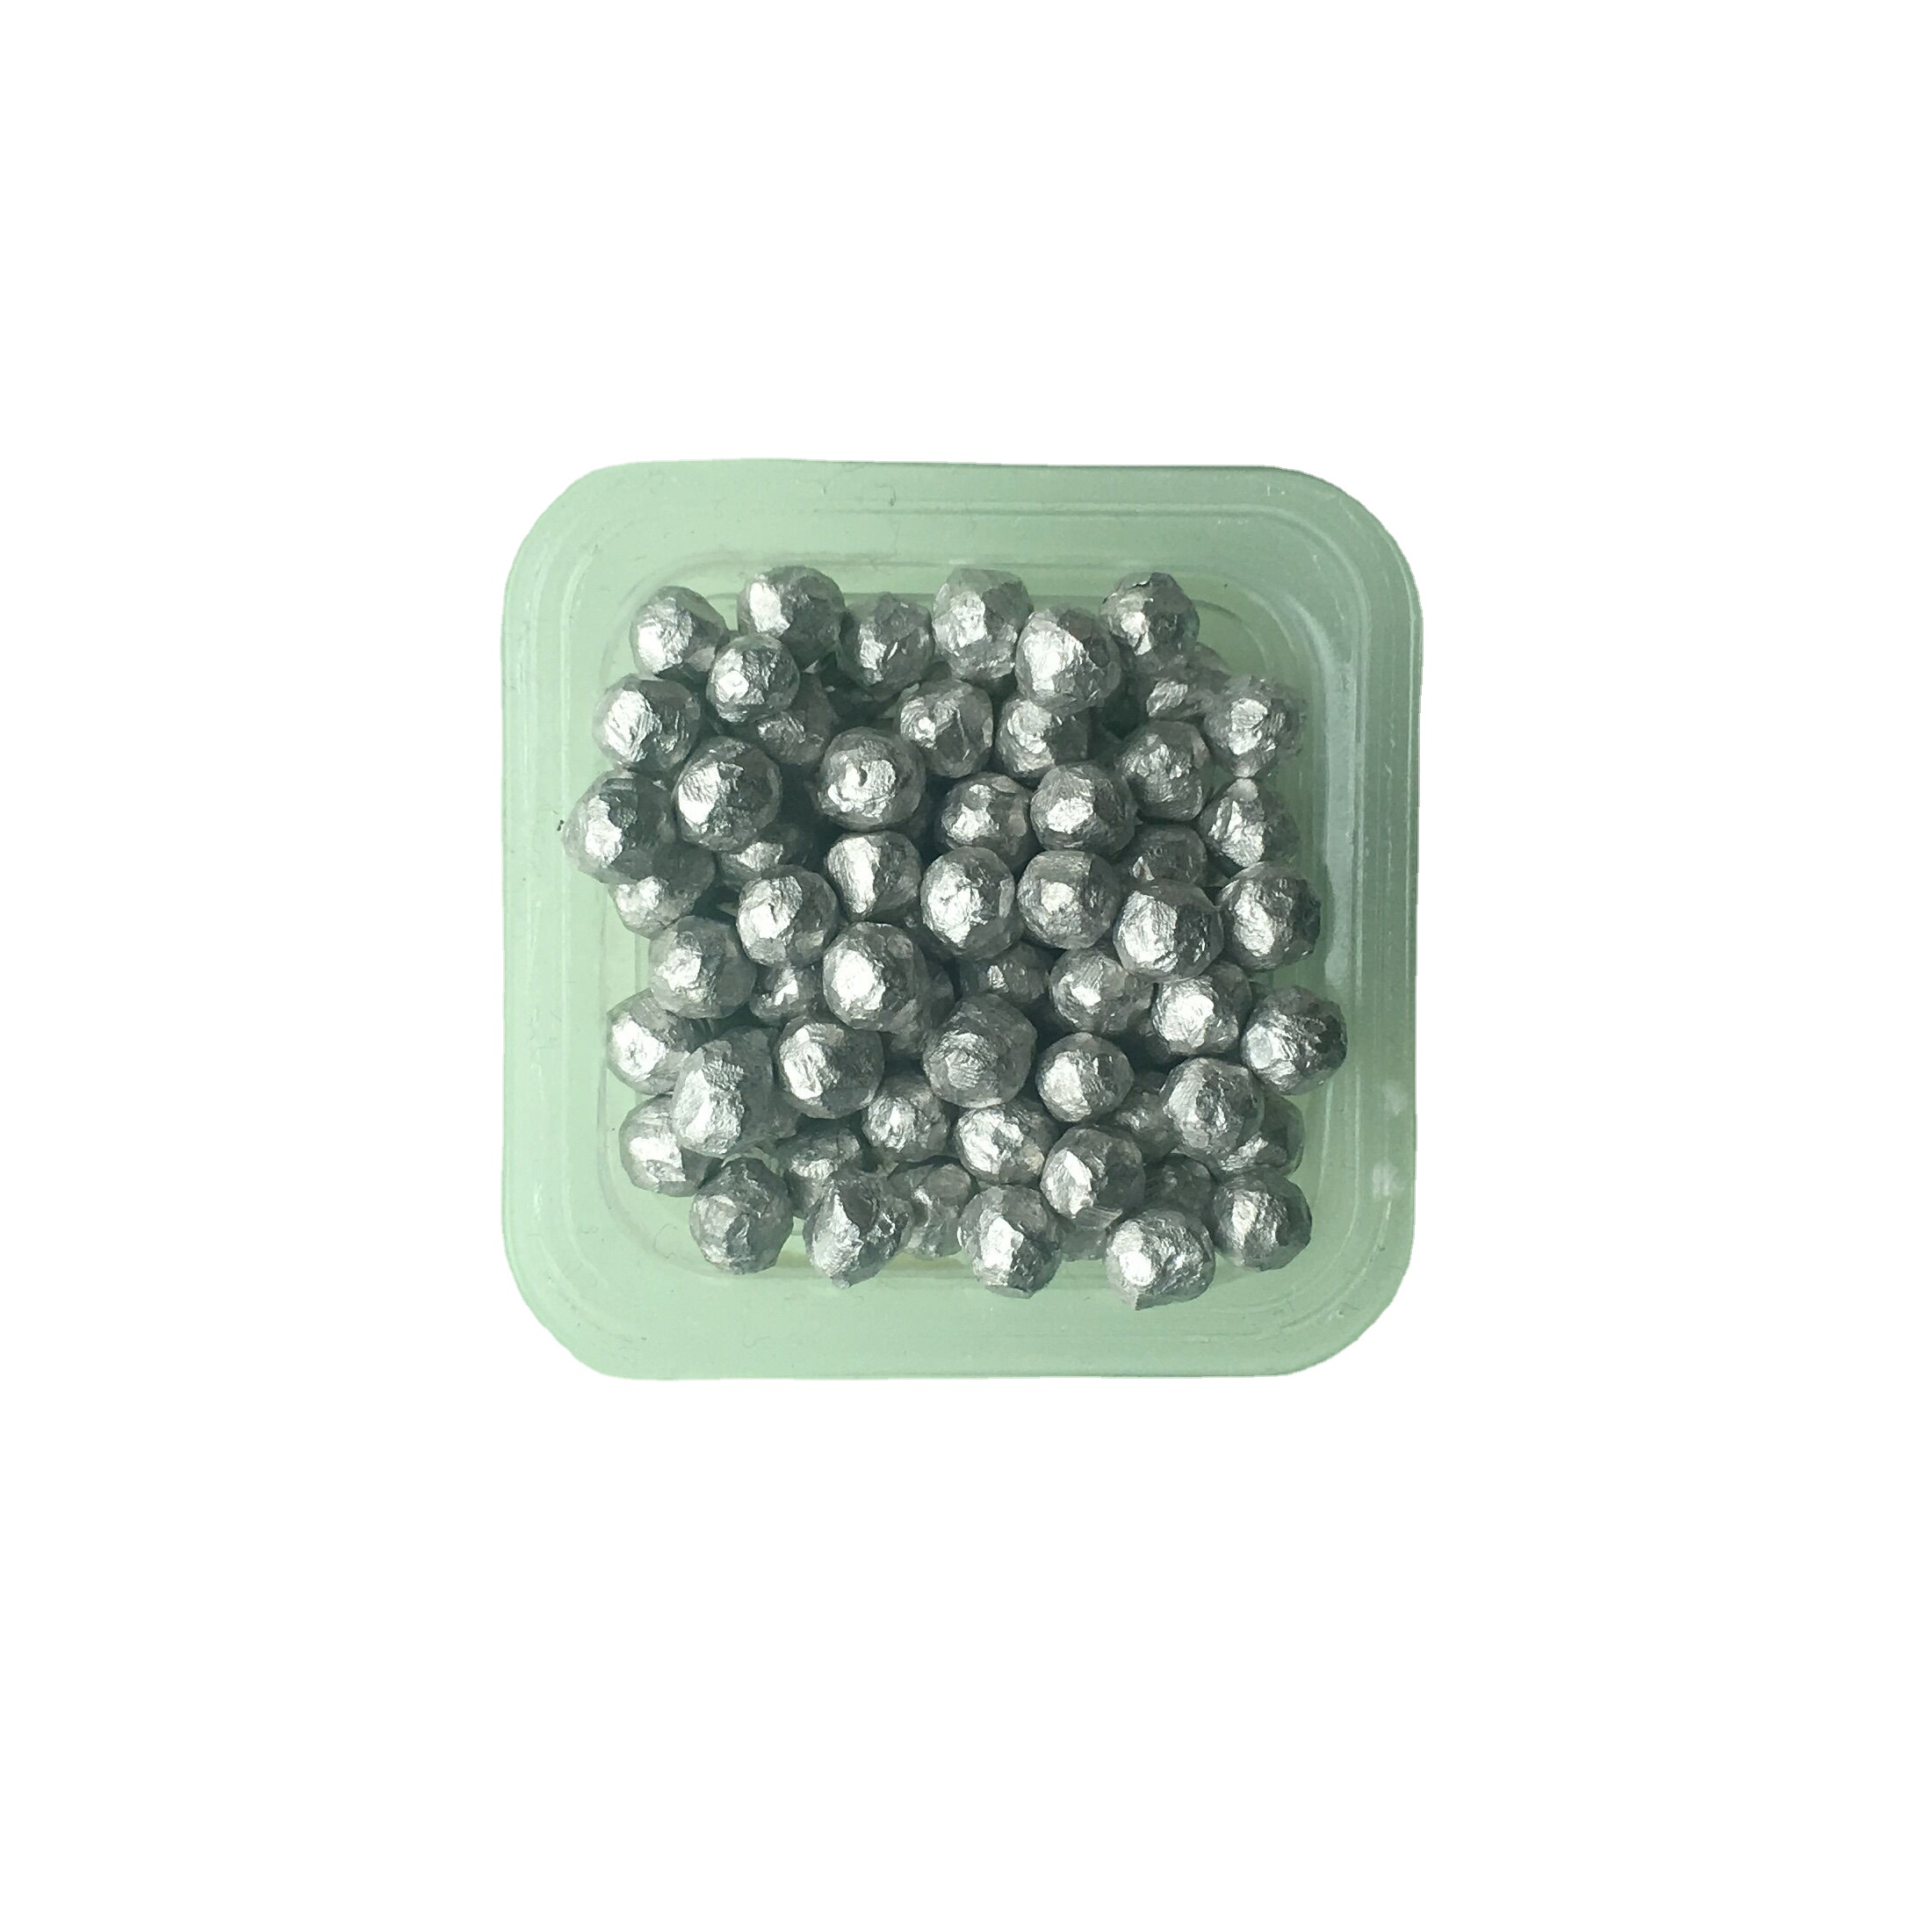 Mainly Sell 99.98% Mg Magnesium ORP Hydrogen Water Magnesium Granular Ball For Washing Clothes And Drinking Water Filter